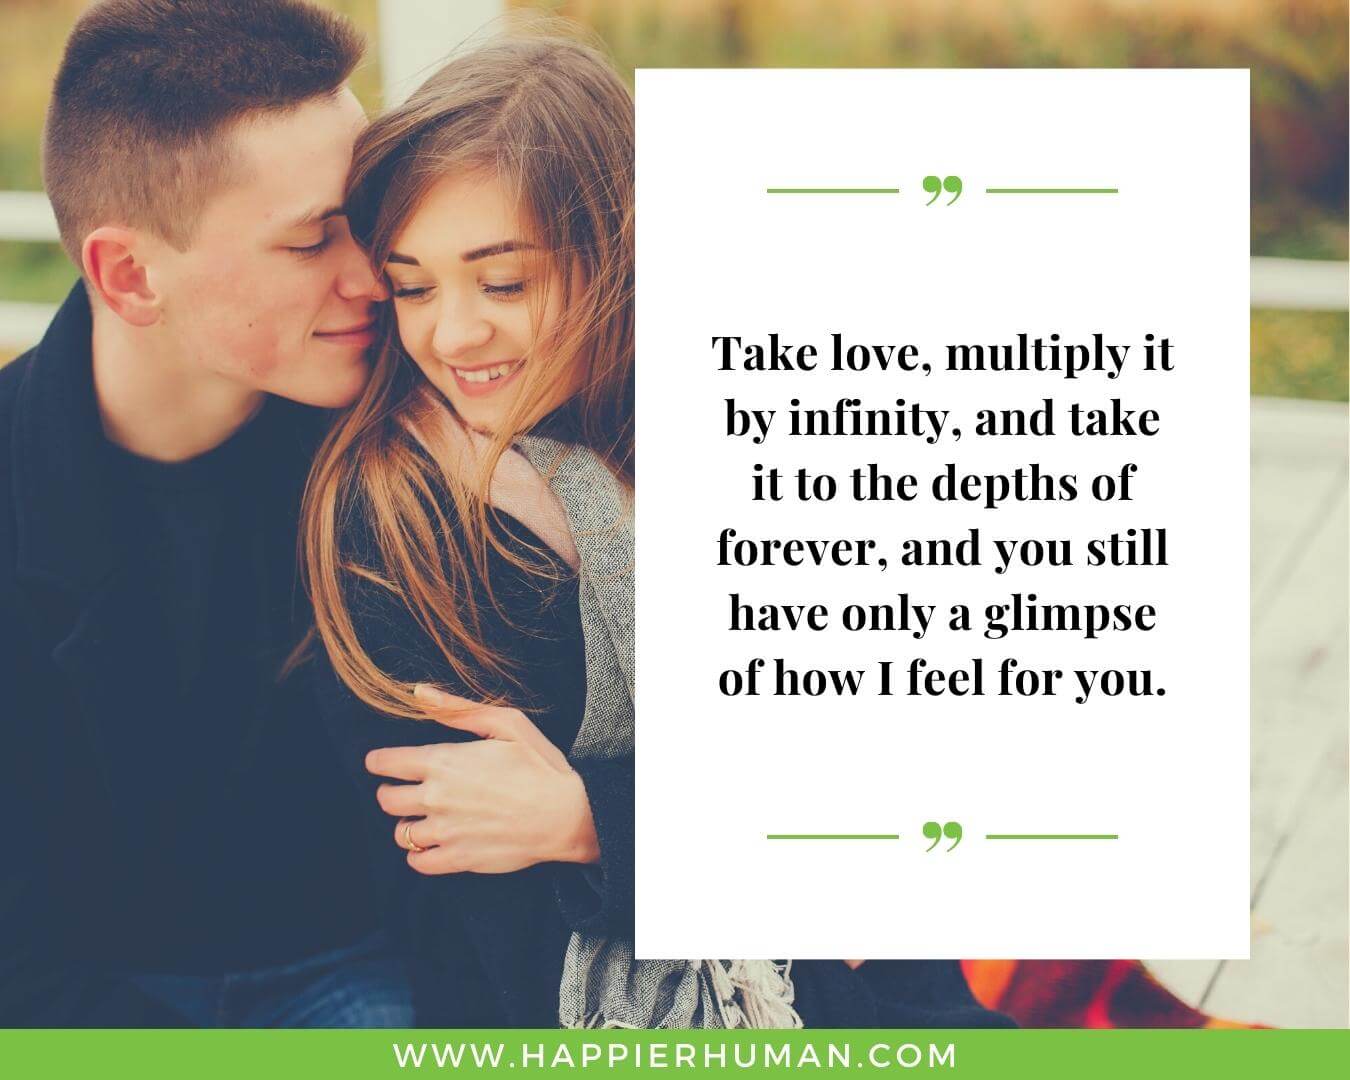 Unconditional Love Quotes for Her - “Take love, multiply it by infinity, and take it to the depths of forever, and you still have only a glimpse of how I feel for you.”